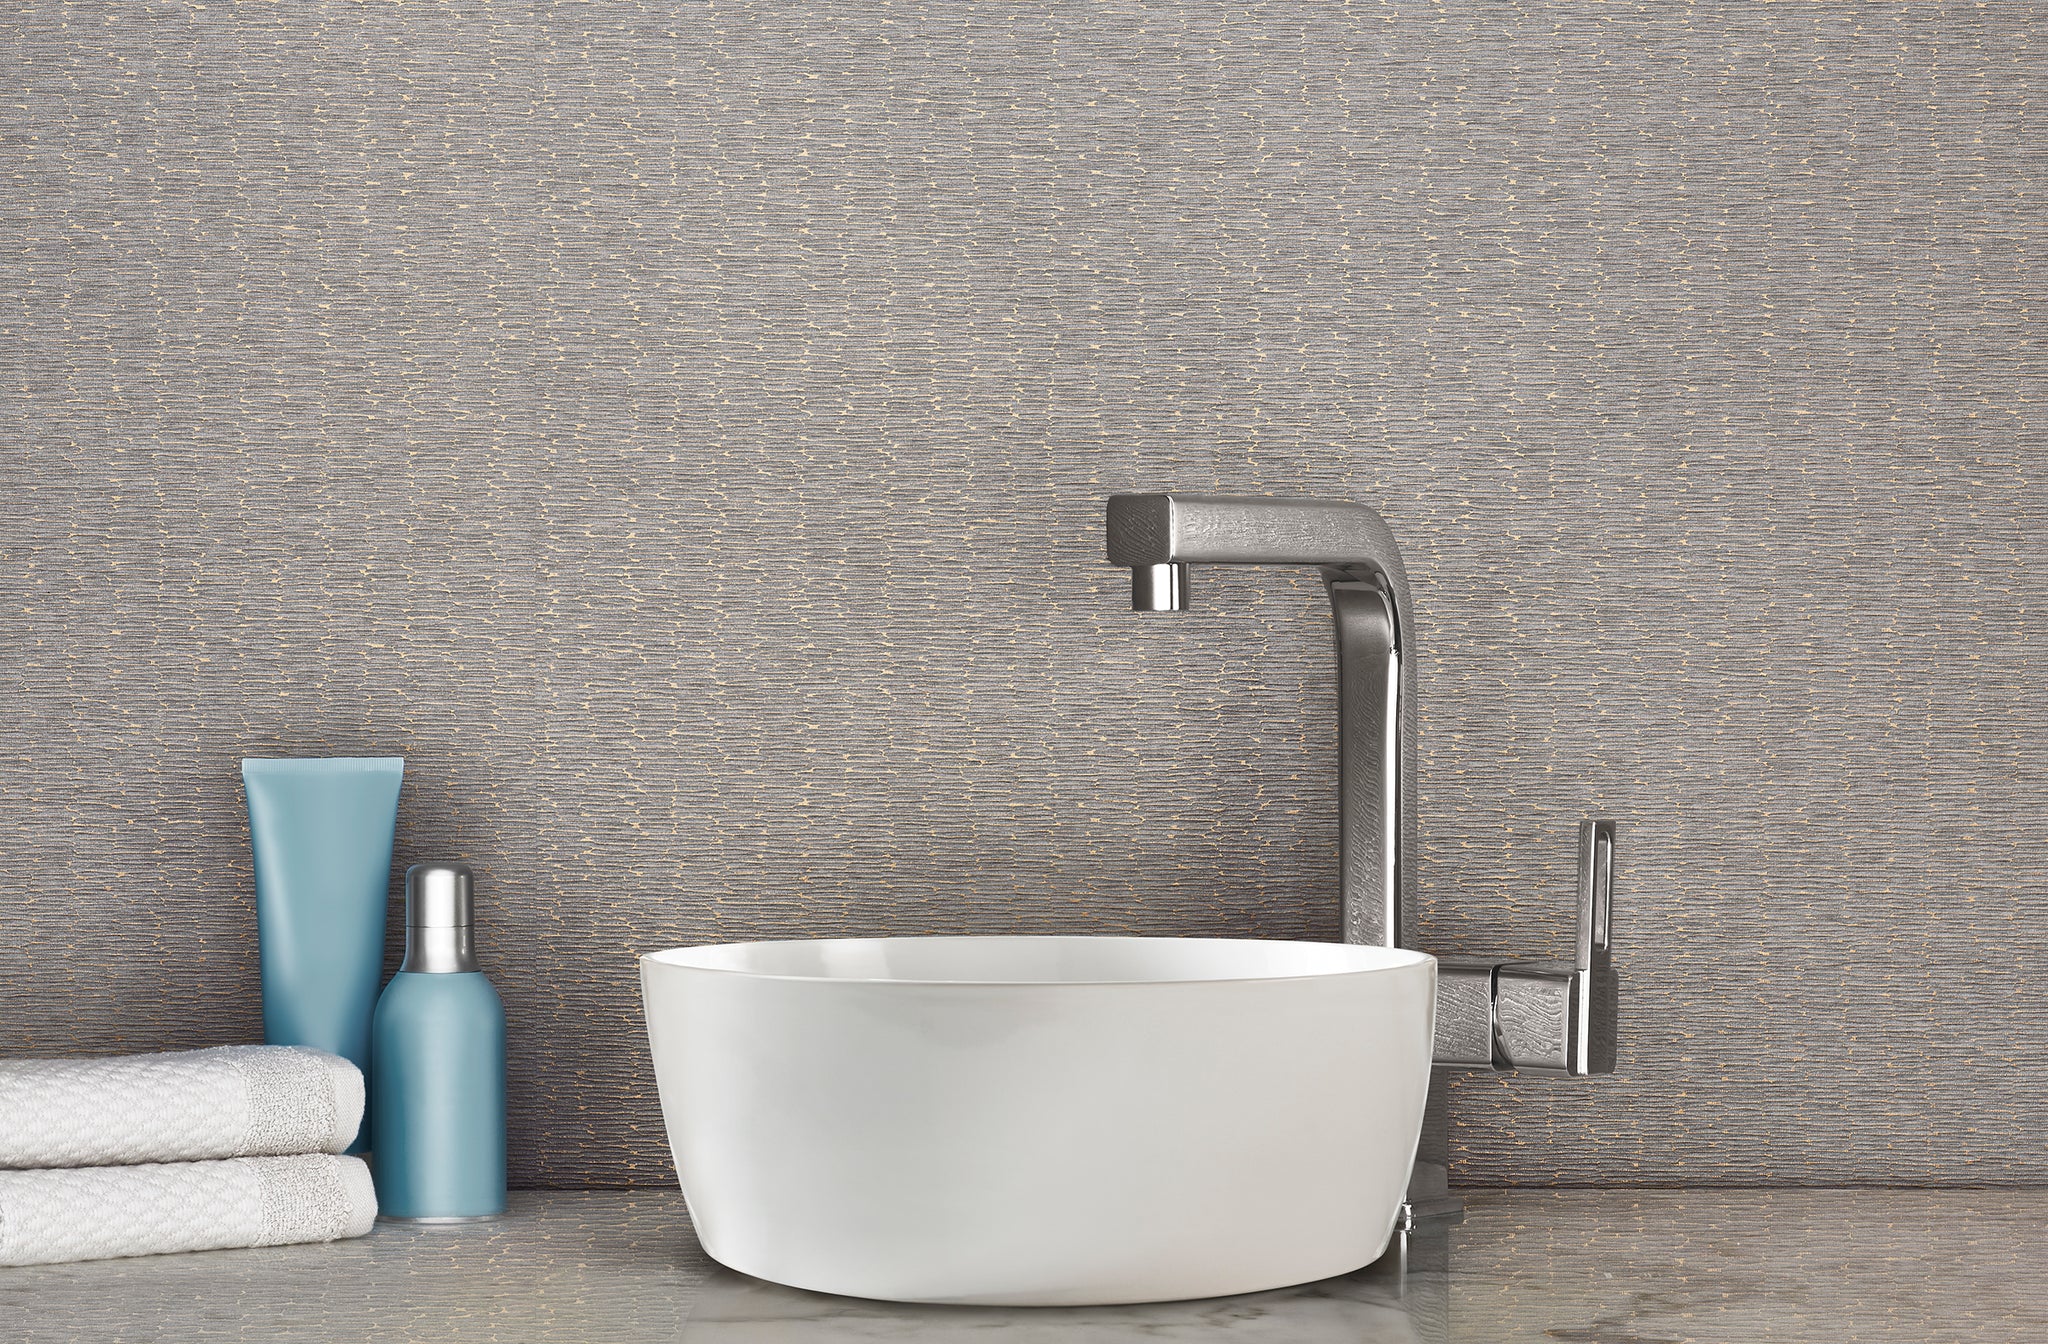 Chipper - Y46873 - Wallcovering - Vycon - Kube Contract